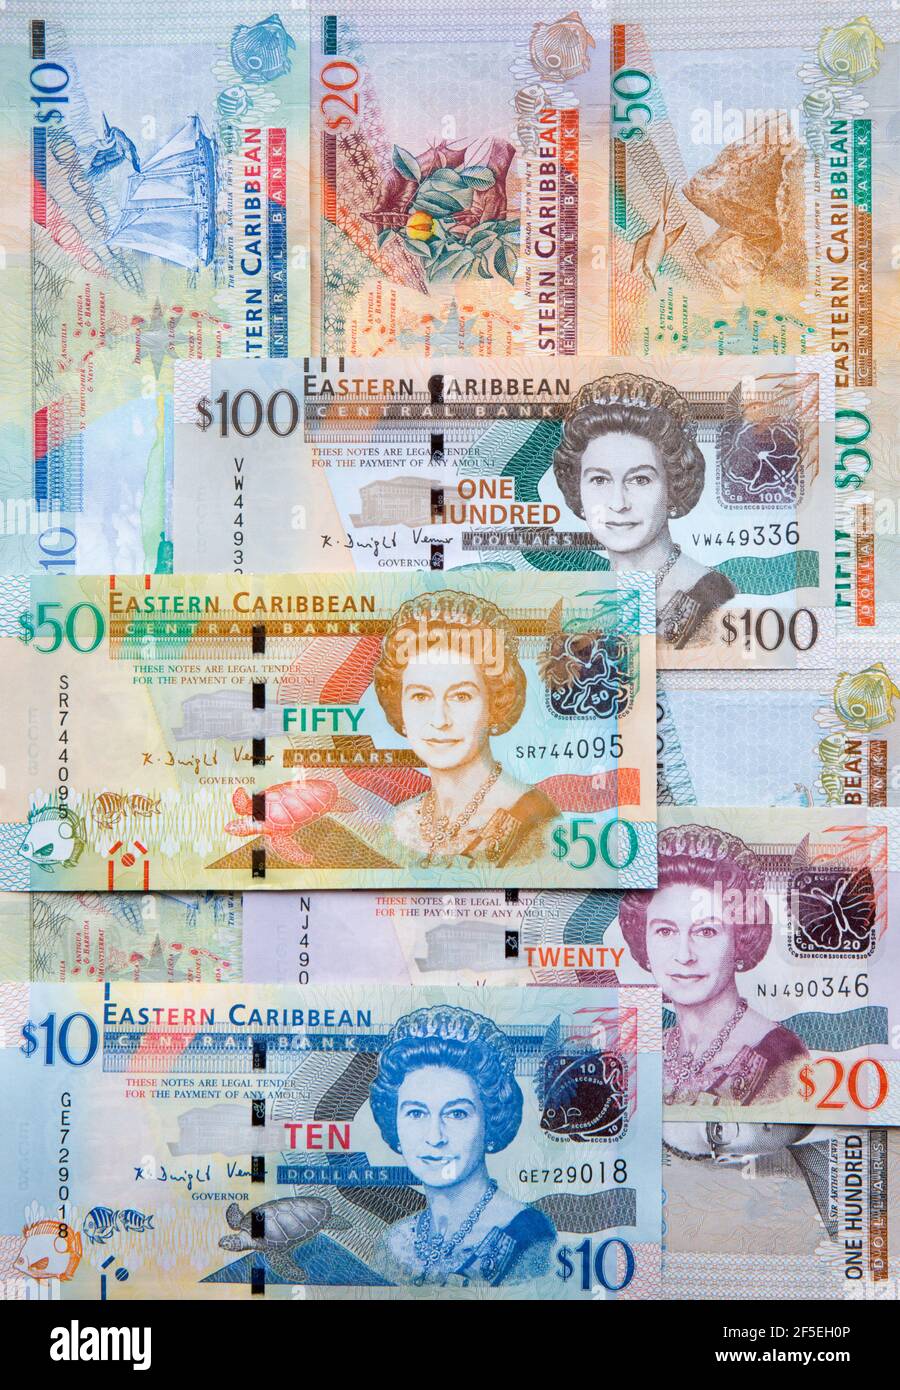 Banknotes of varying denominations issued by the Eastern Caribbean Central Bank. Stock Photo